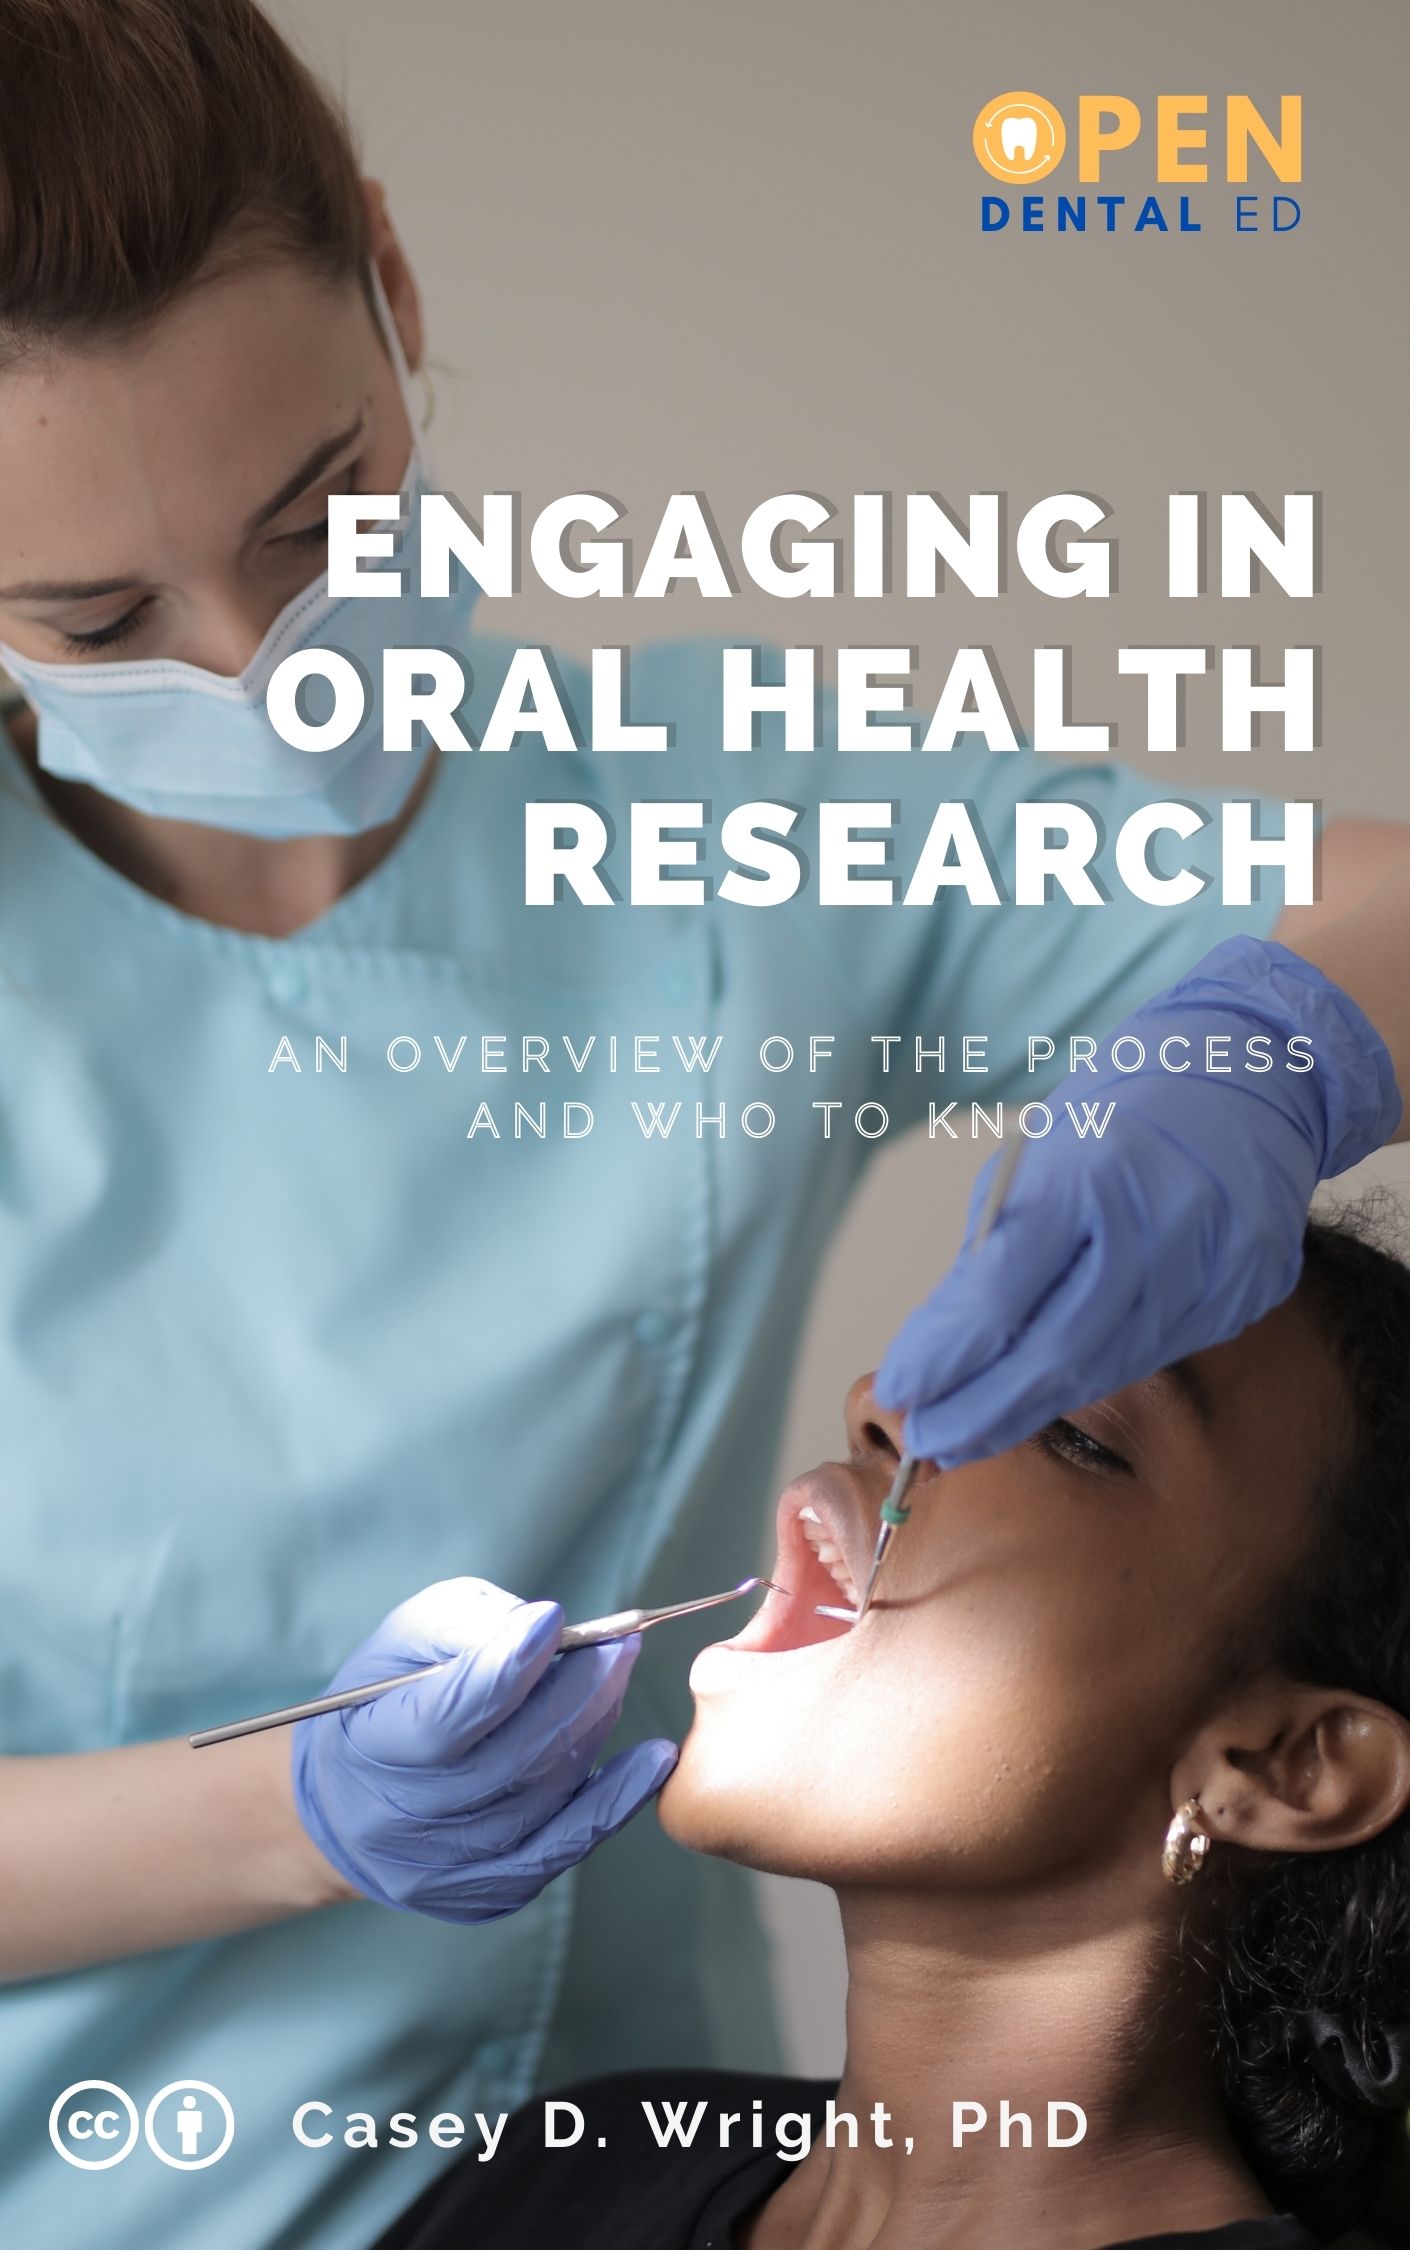 Engaging in Oral Health Research and Scholarship